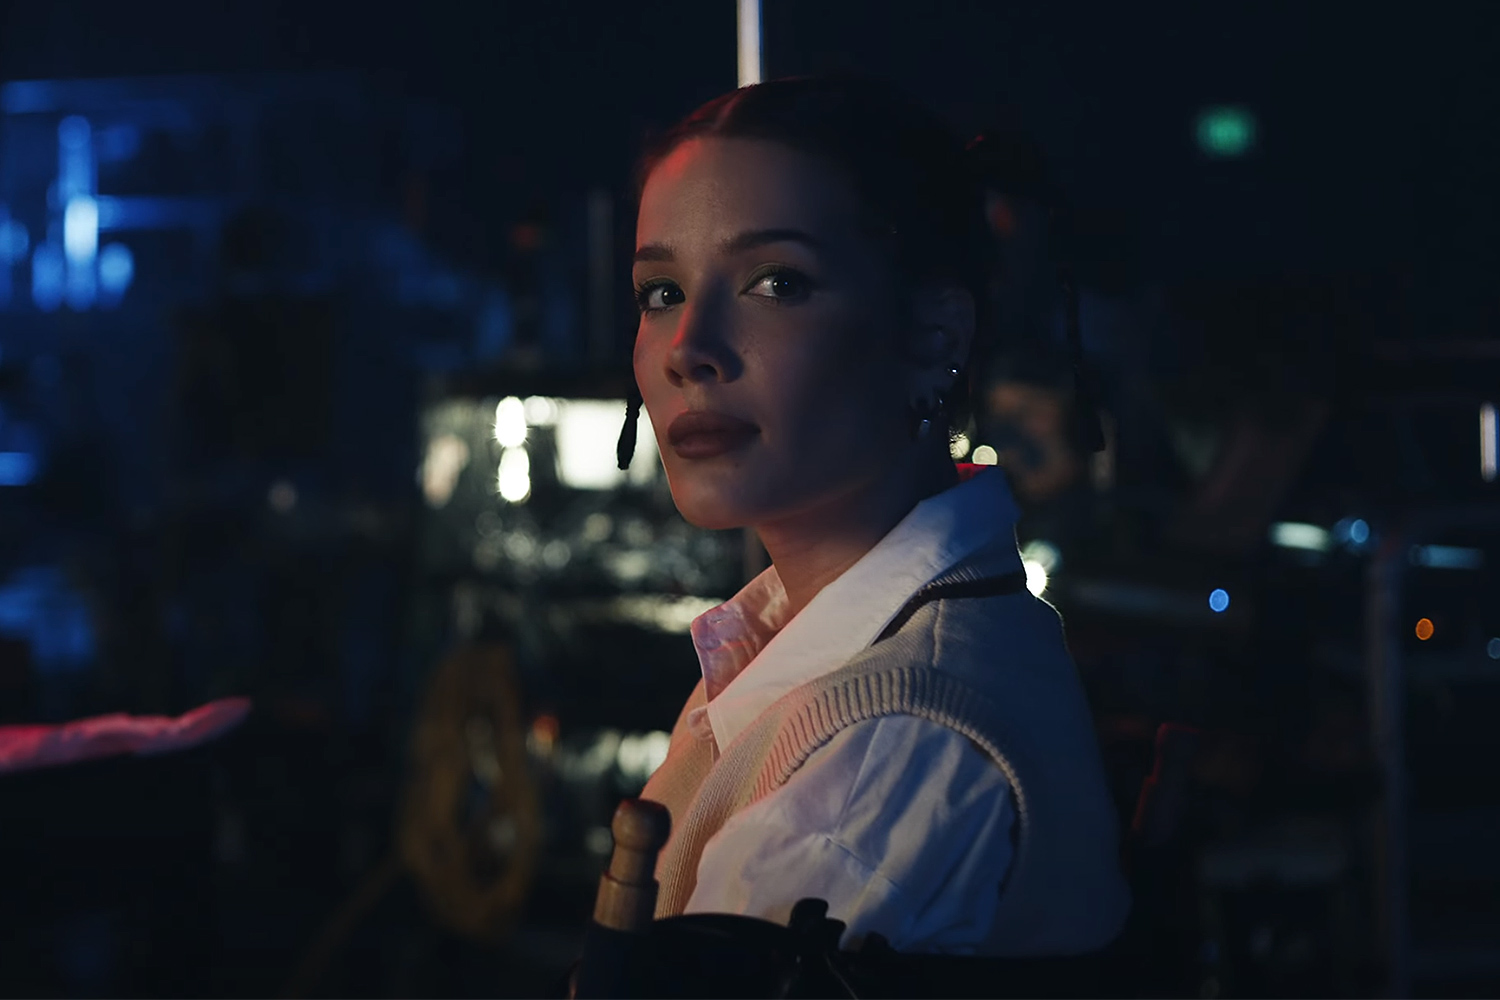 Halsey Shares 'So Good' Music Video, Featuring Home Videos with Partner Alev Aydin